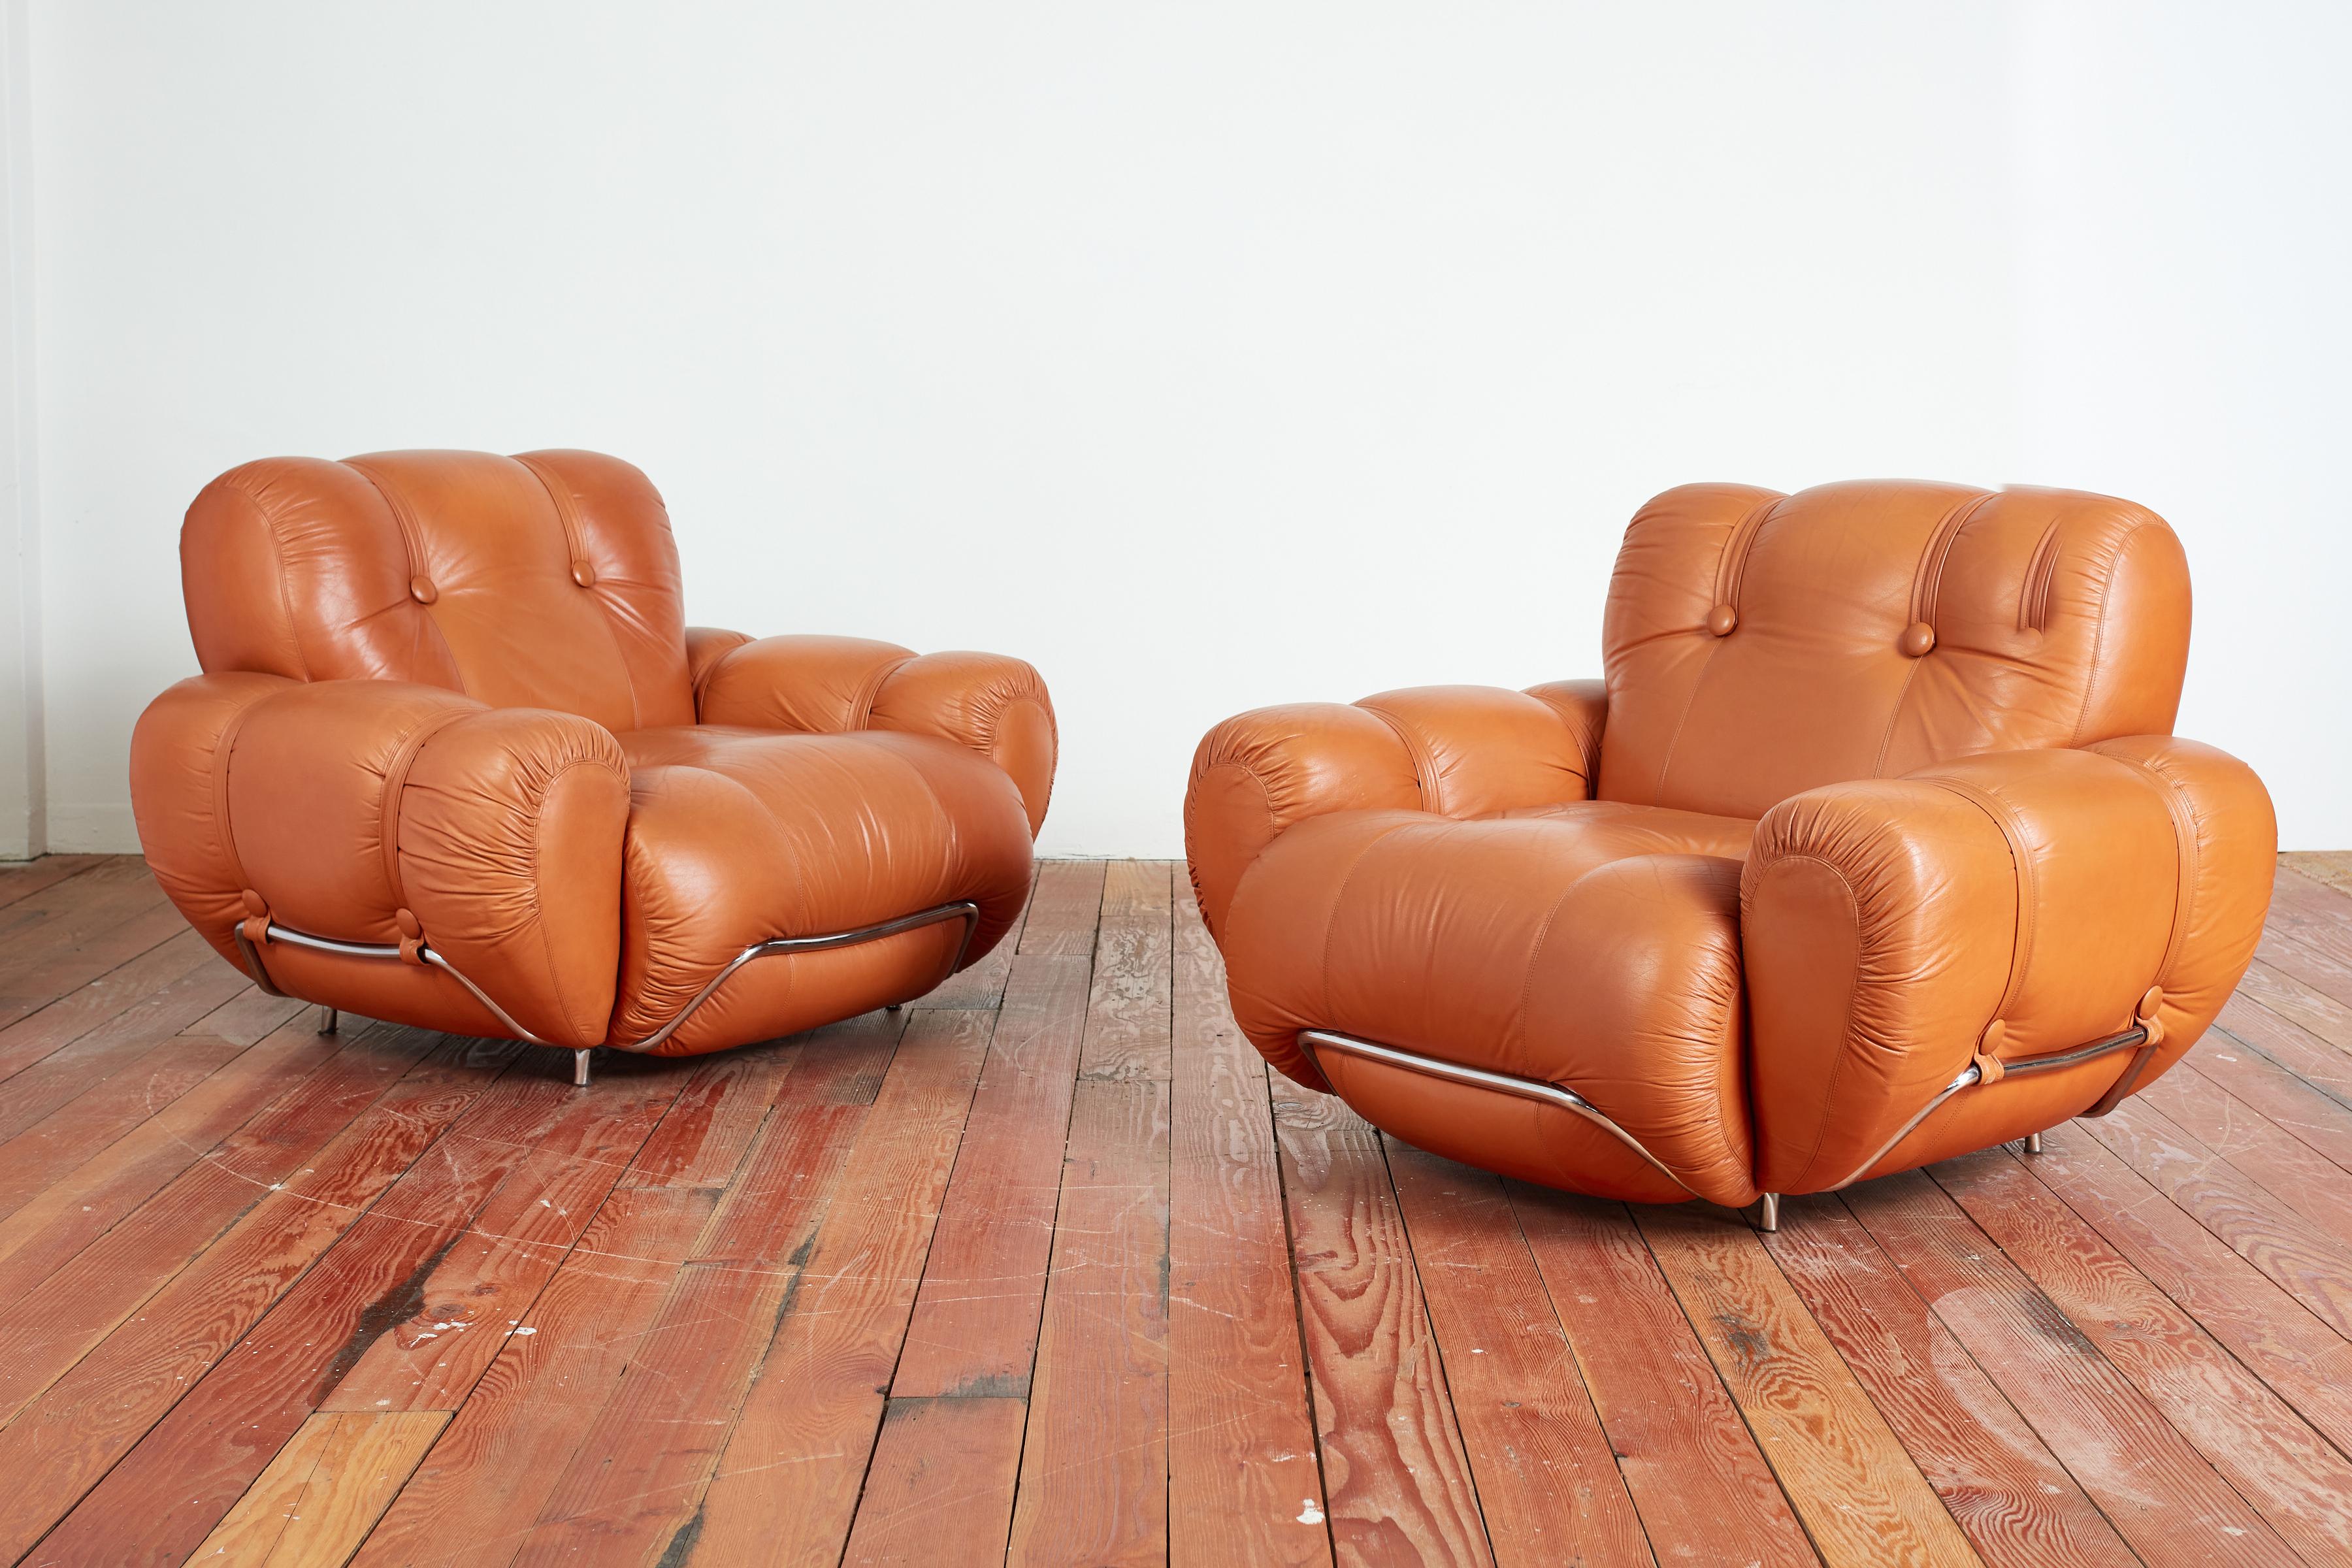 Huge pair of Italian leather lounge chairs with bulbous design and wonderful curves. 
Chrome detail throughout with tufted leather cushions. 
Italy, 1970's 
